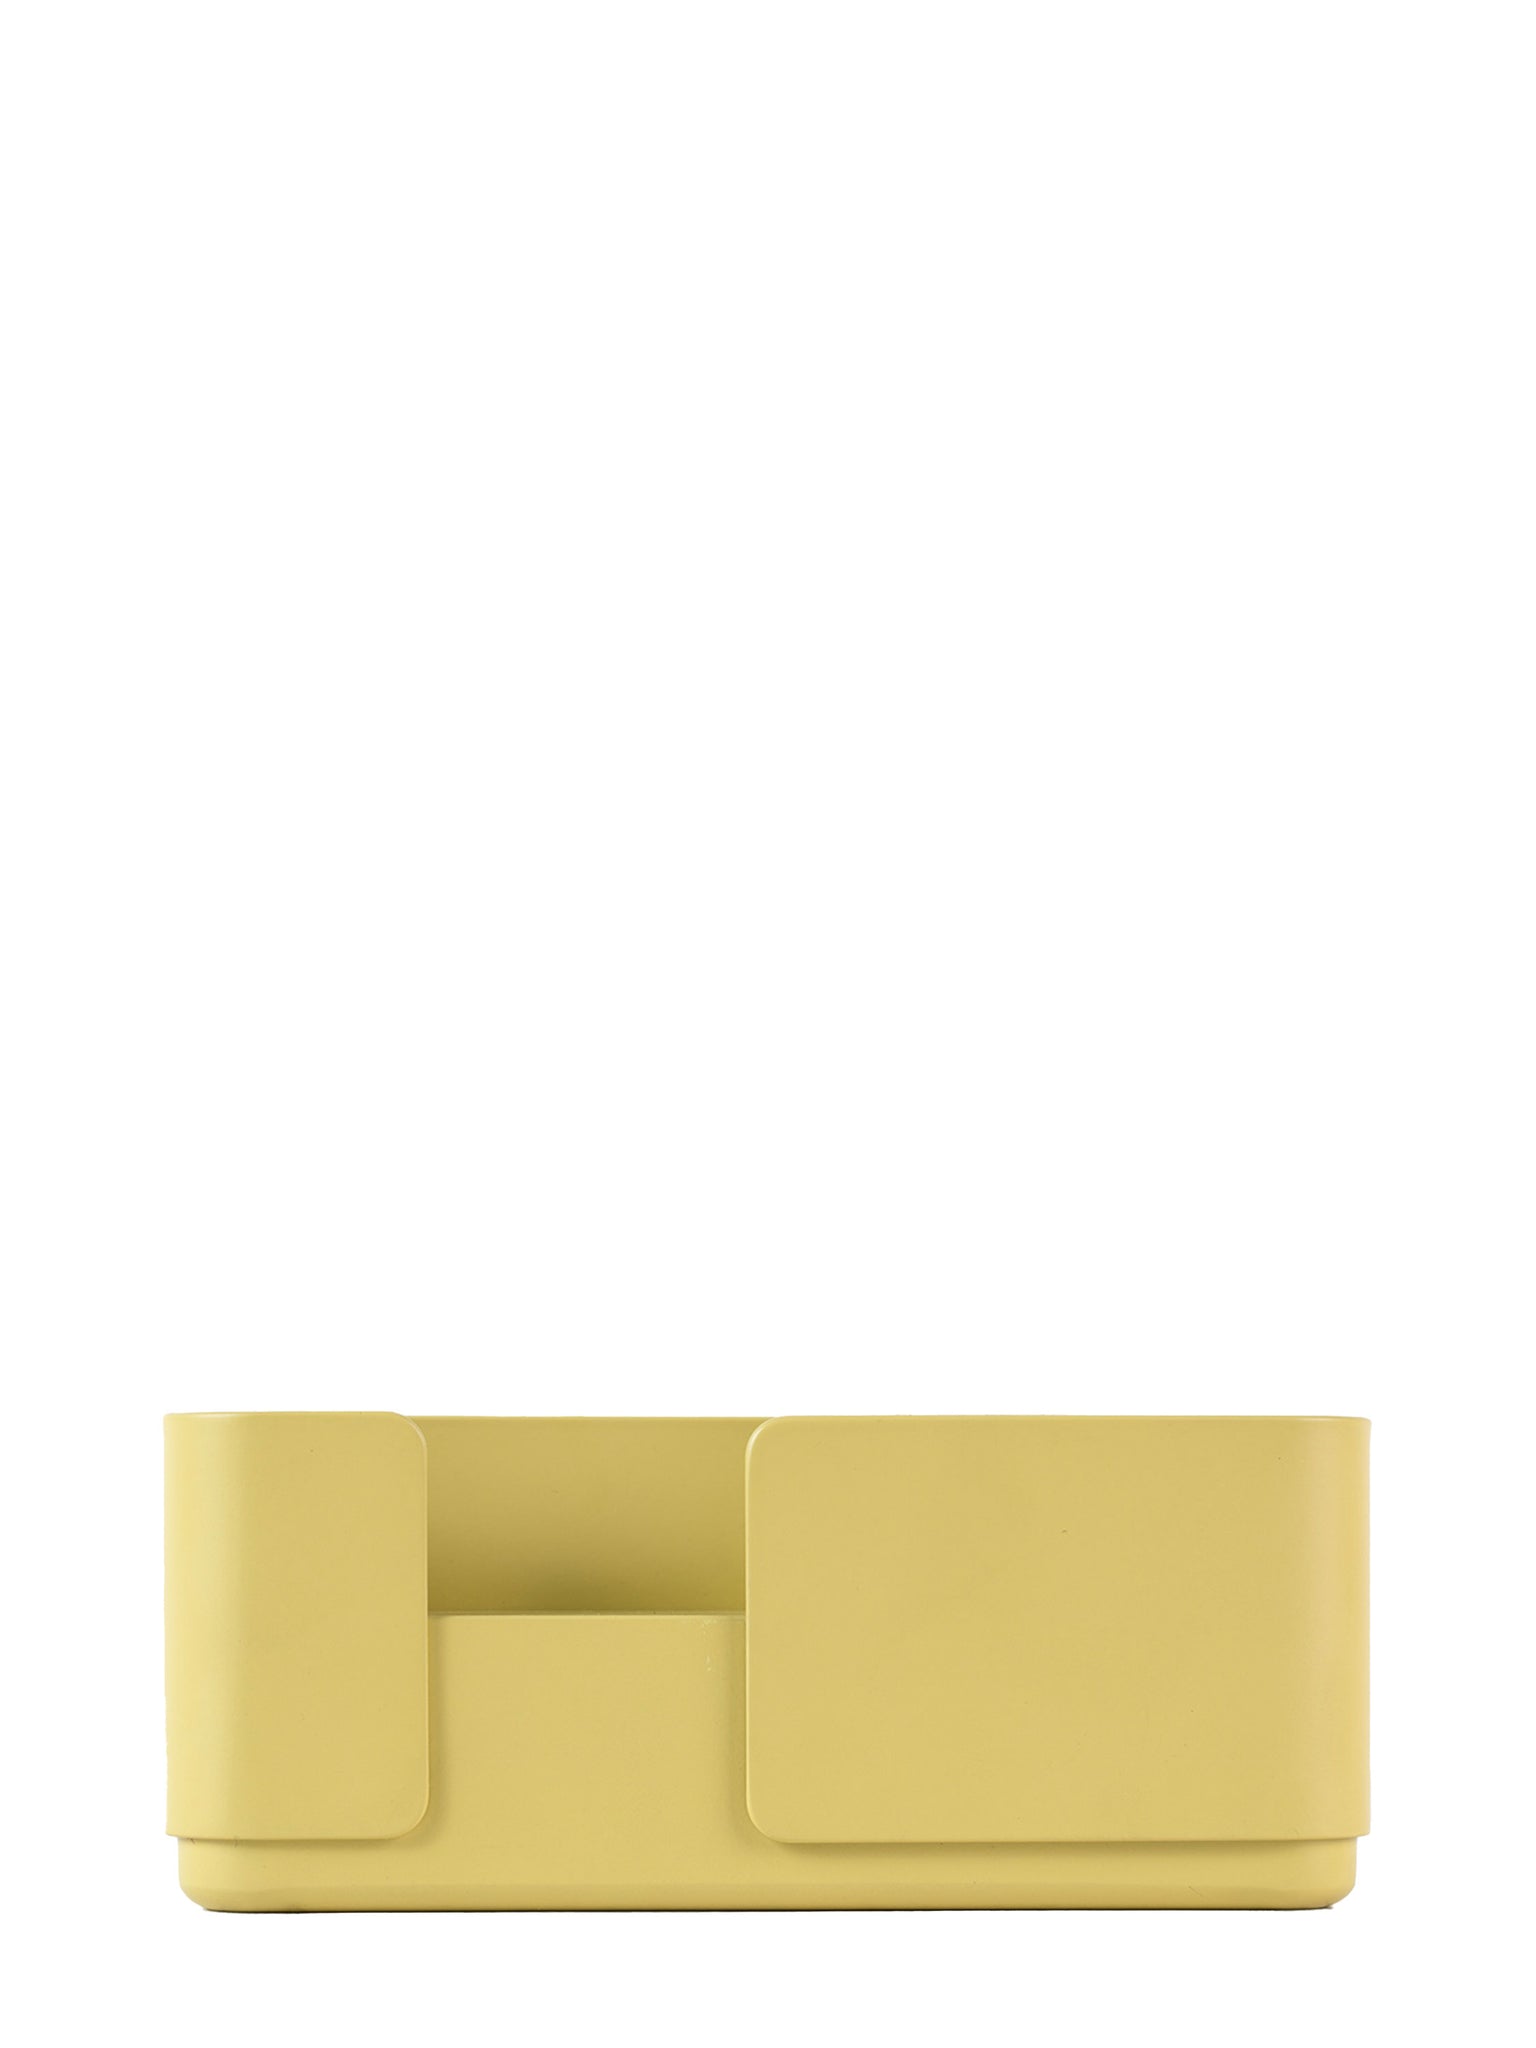 Double dinner candle holder in yellow for dinner candles for the contemporary design lover and scandinavian style